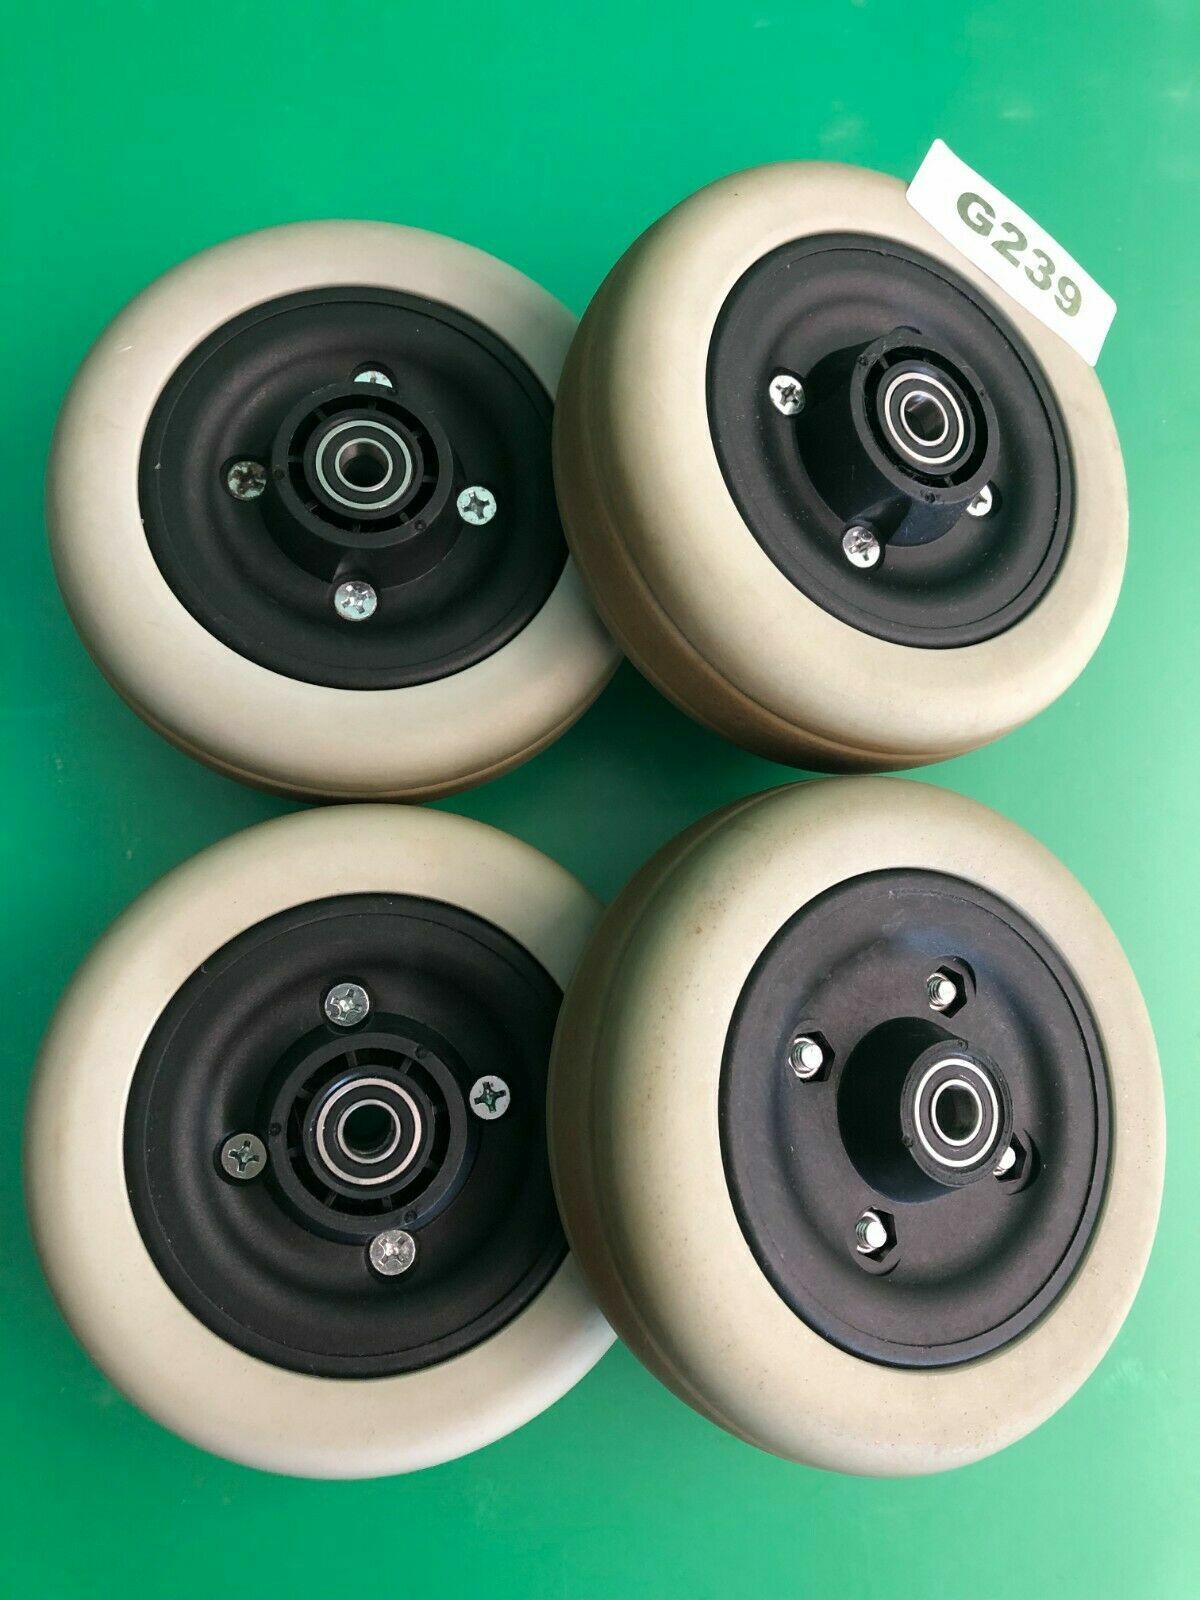 Rear & Front Caster Wheels for Pronto Sure Step Powerchairs -set of 4- #G239